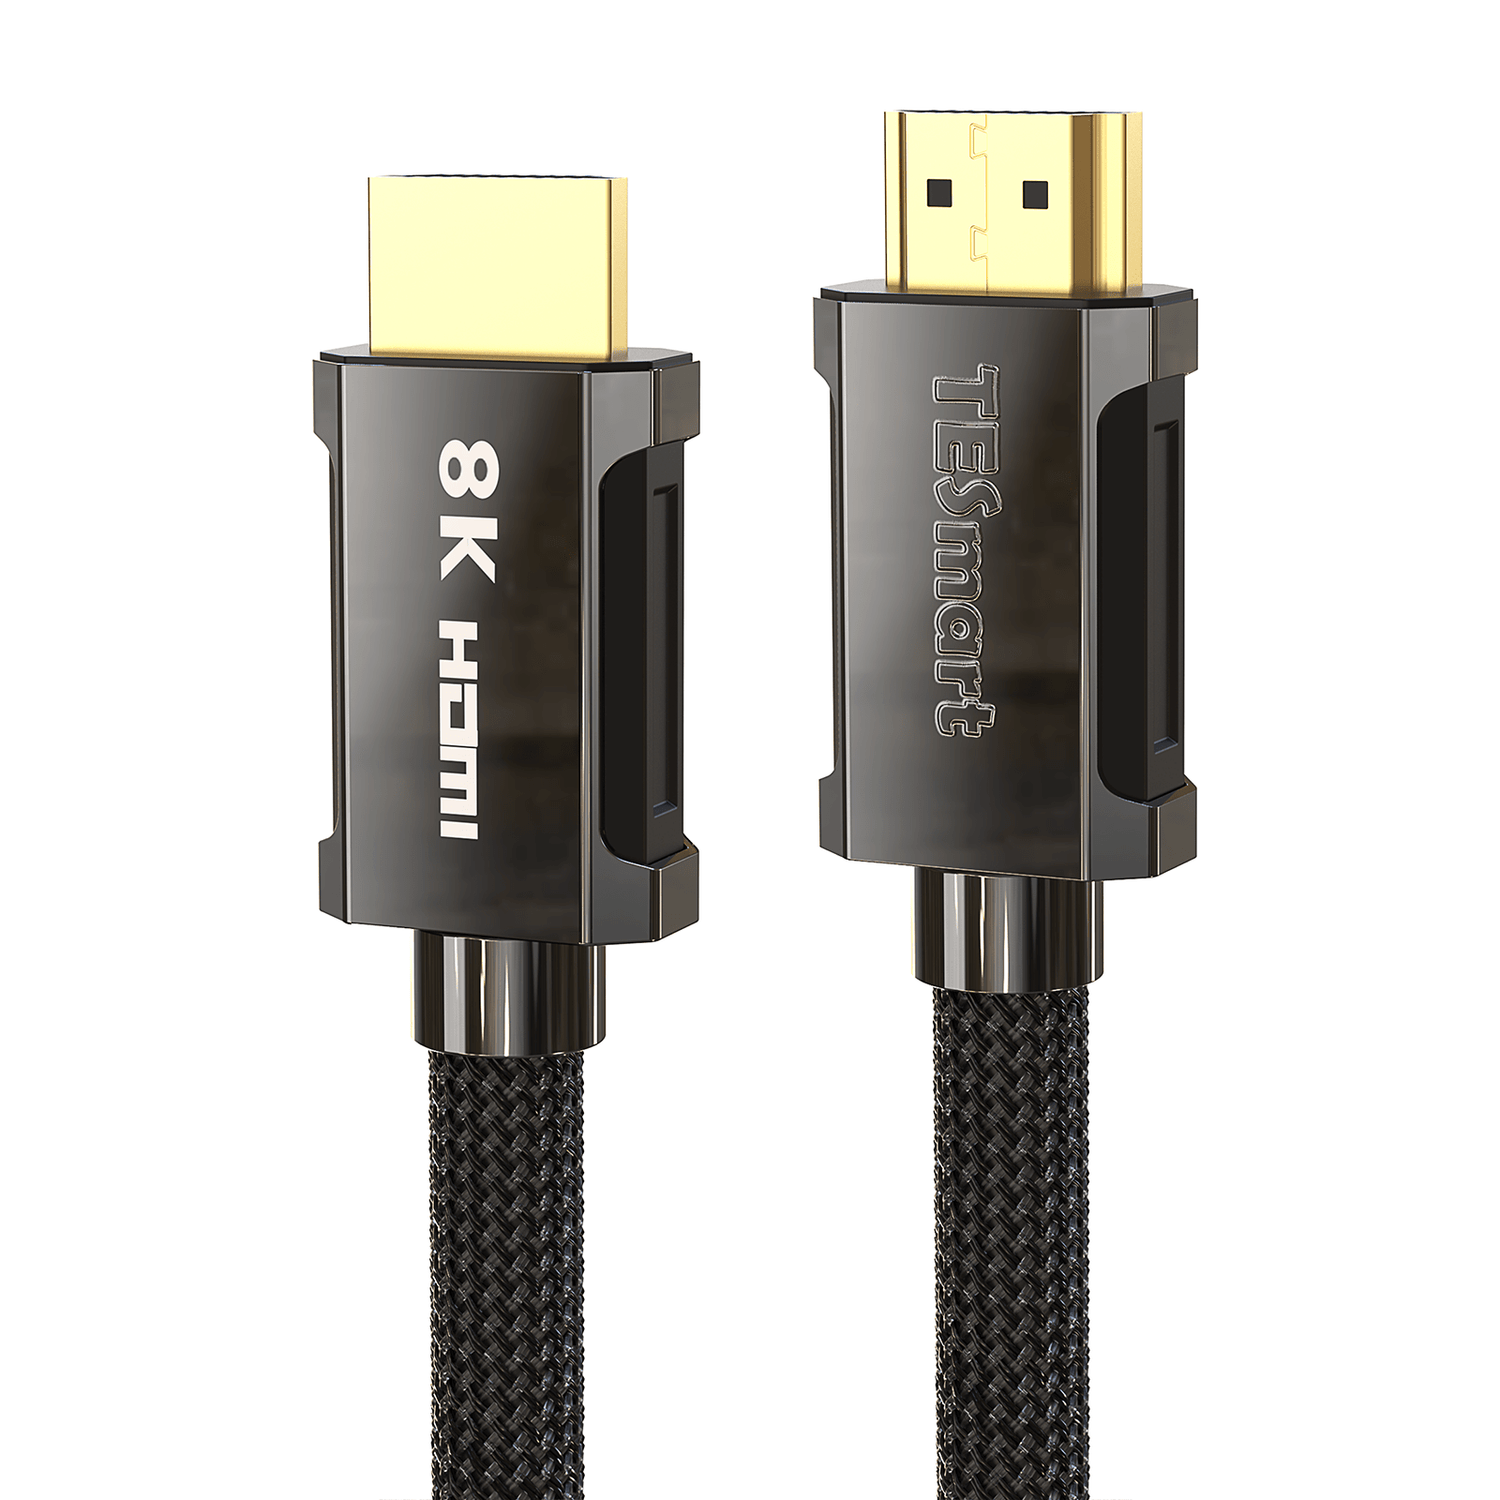 TESmart HD8K200 TESmart Accessoriess 8K HDMI 2.1 Cable 6.6ft, 48Gbps High-Speed ,Dynamic HDR, eARC, Dolby Vision 710185993348 HDMI 2.1 8K Cable Supports HDR, Dolby Vision, 3D, ARC -TESmart 2m